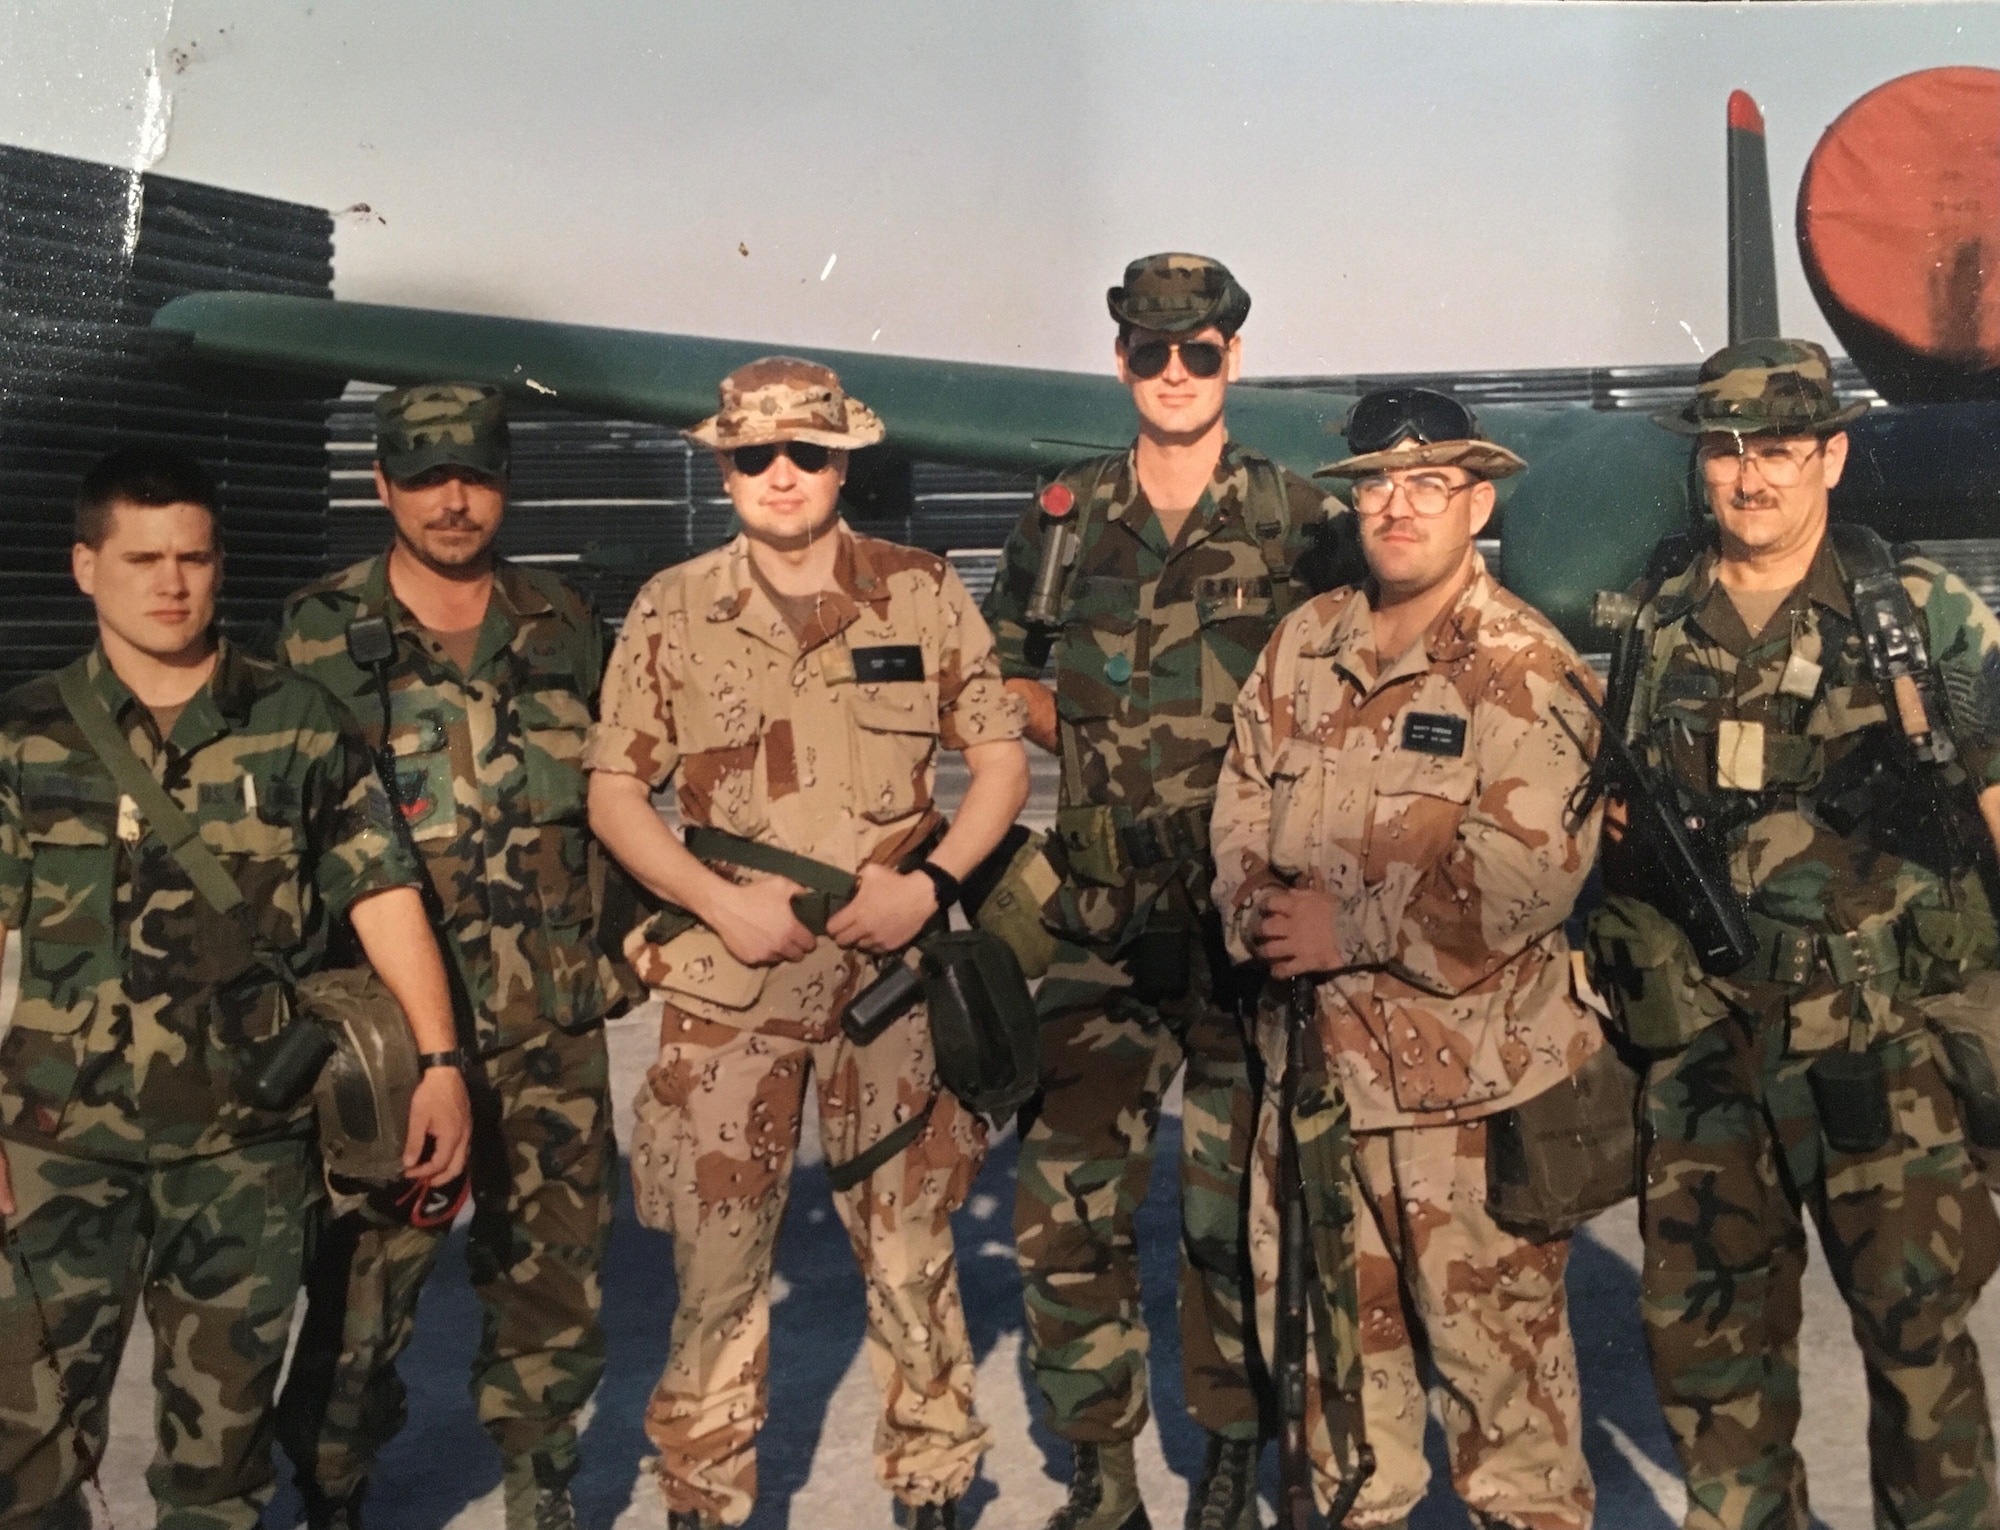 Lt. Col. William Short, (far left) poses for a photo, June 1990, while deployed in support of Operation Desert Shield in Saudi Arabia. Short, then an Air Force staff sergeant, was one of 697,000 U.S. troops to participate in the operation. (Courtesy photo)